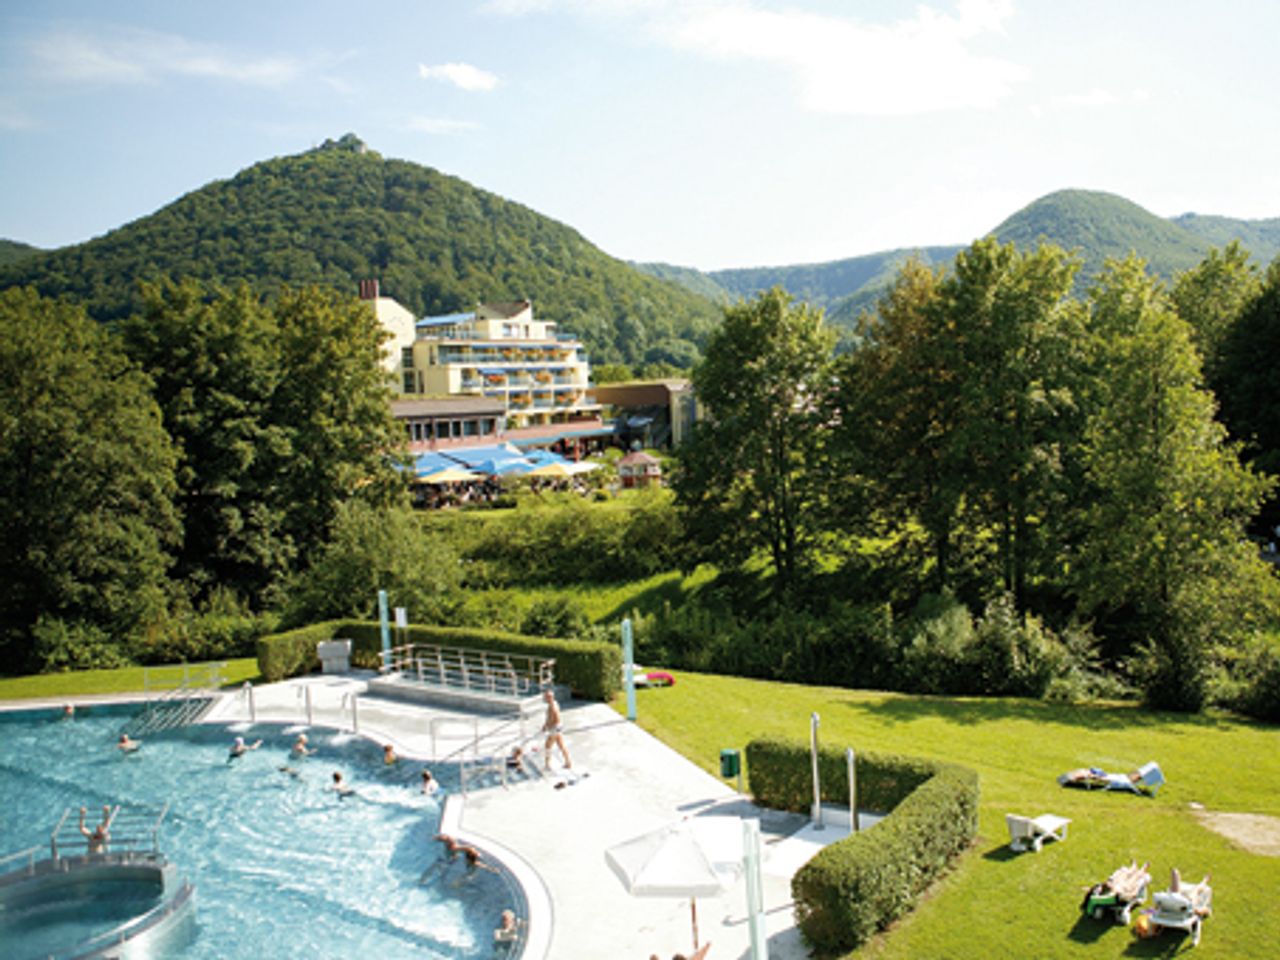 4 Tage pure Entspannung mit AlbCard und Therme